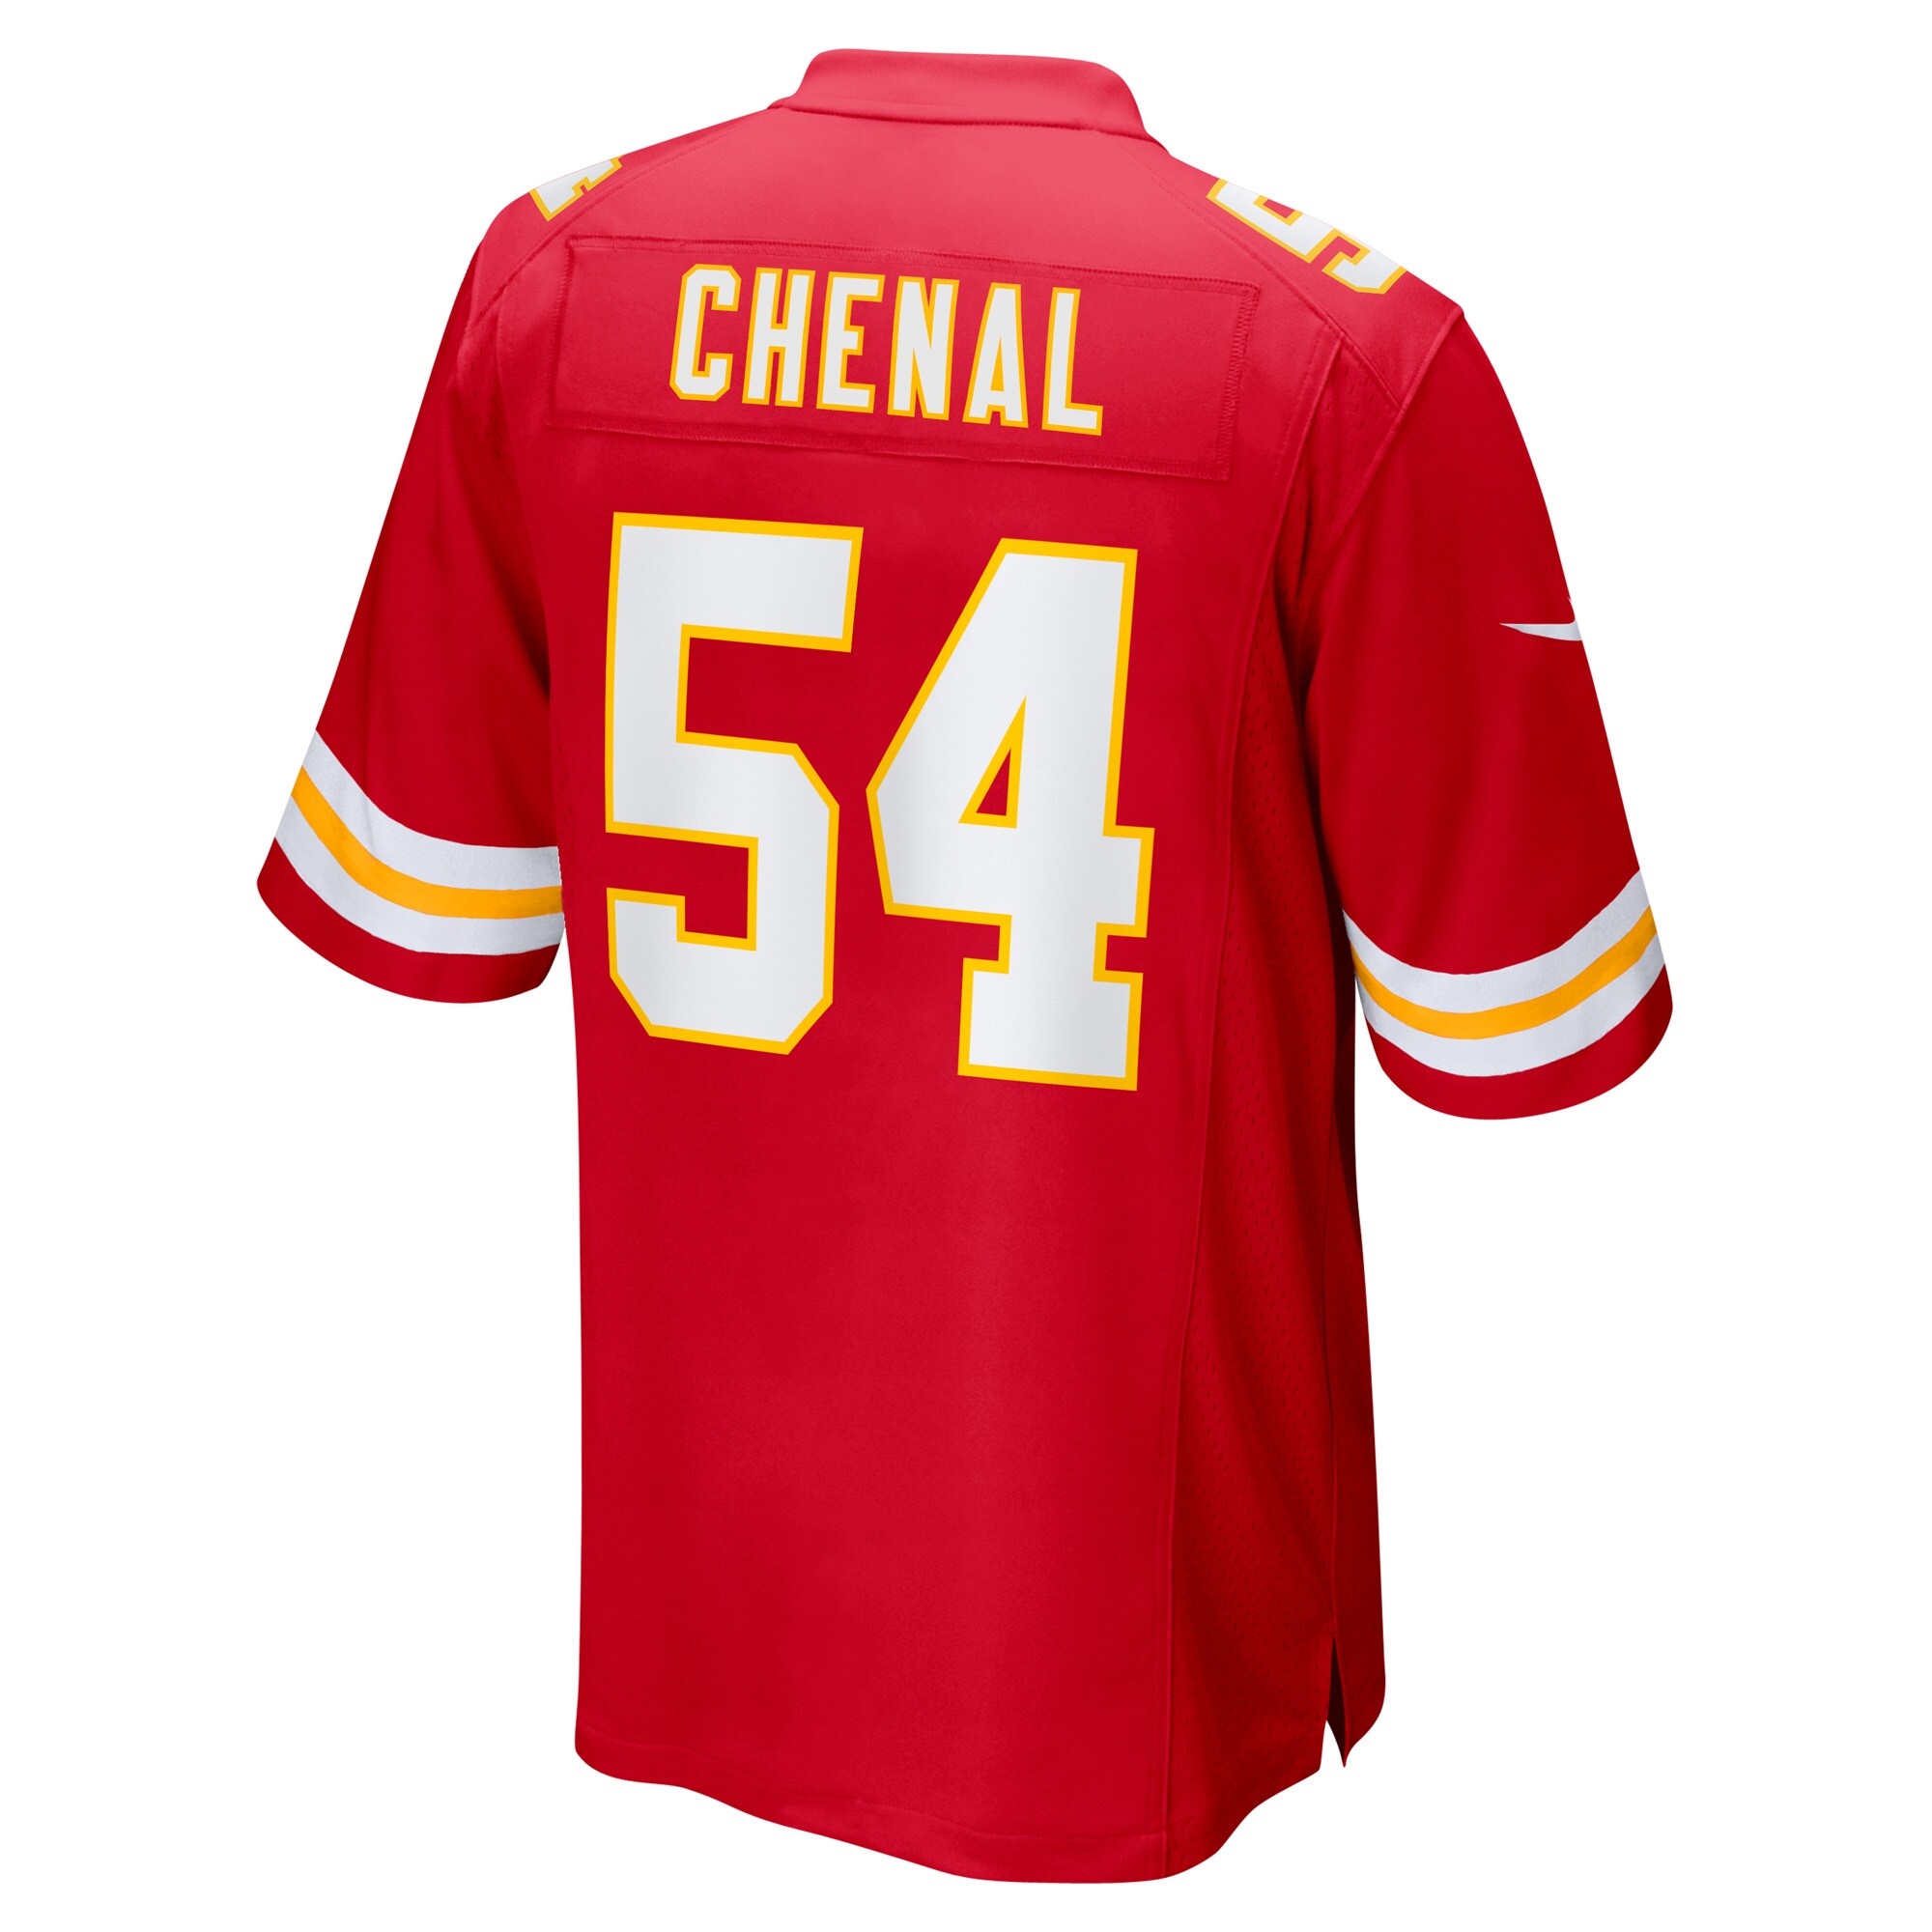 Men's Kansas City Chiefs Jerseys Red Leo Chenal Game Player Style